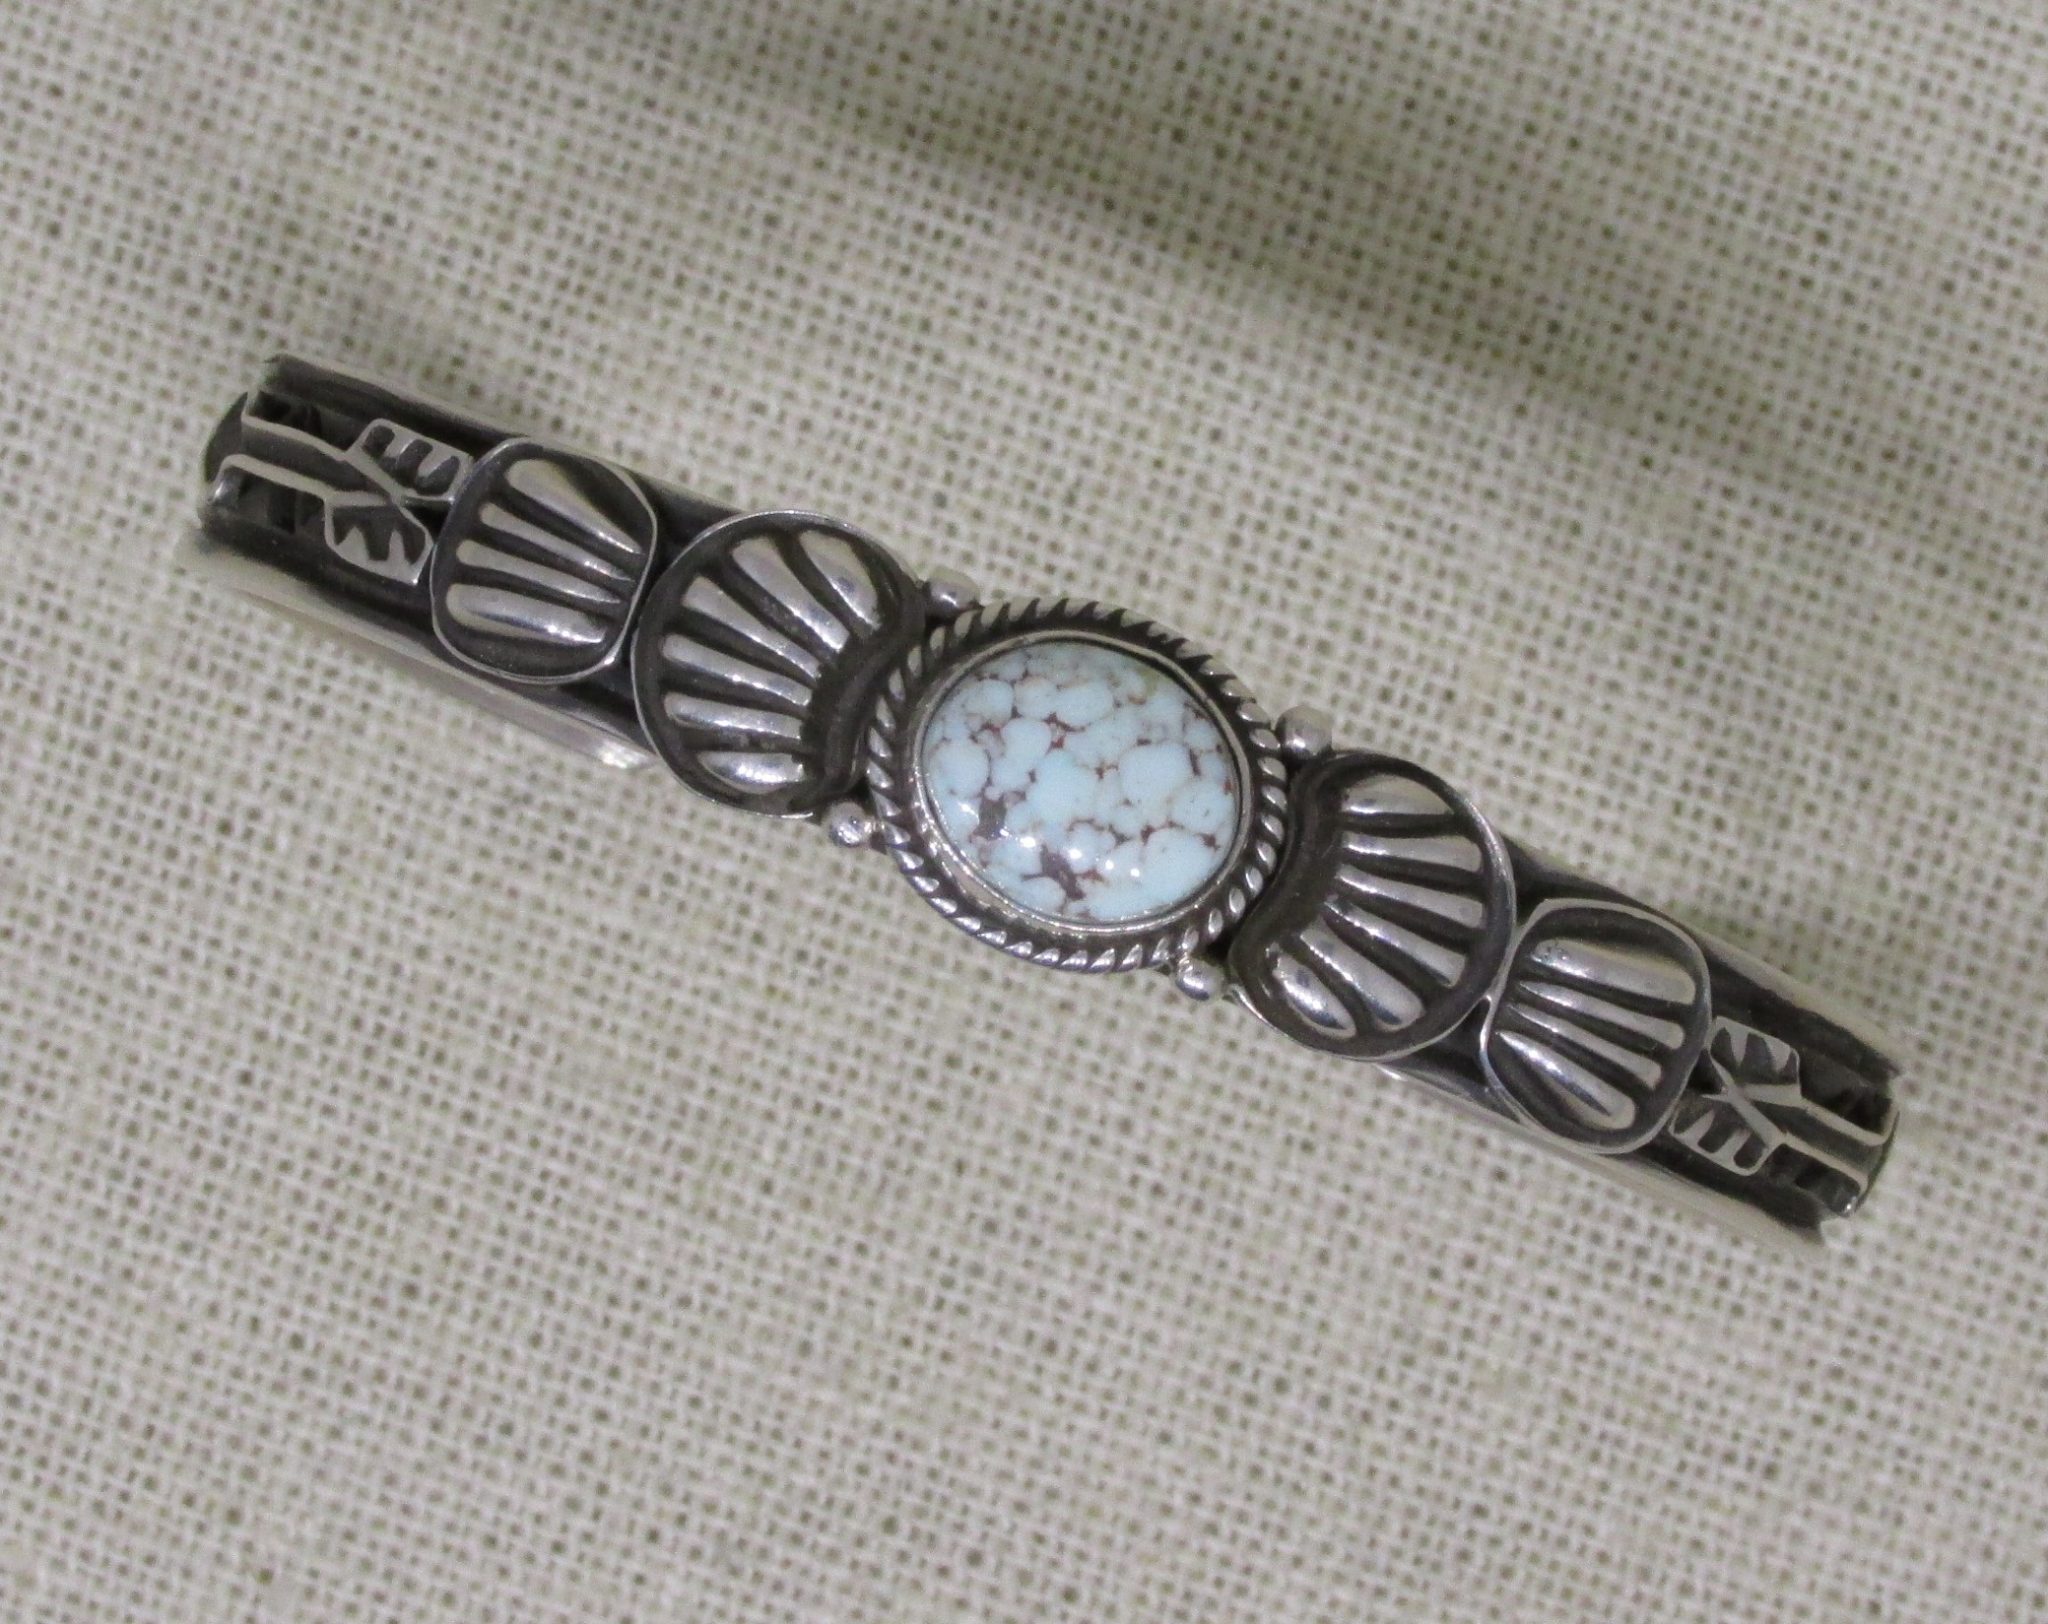 SOLD - TSOSIE ORVILLE WHITE Navajo (Dine') DRY CREEK TURQUOISE and Sterling  Silver Bracelet